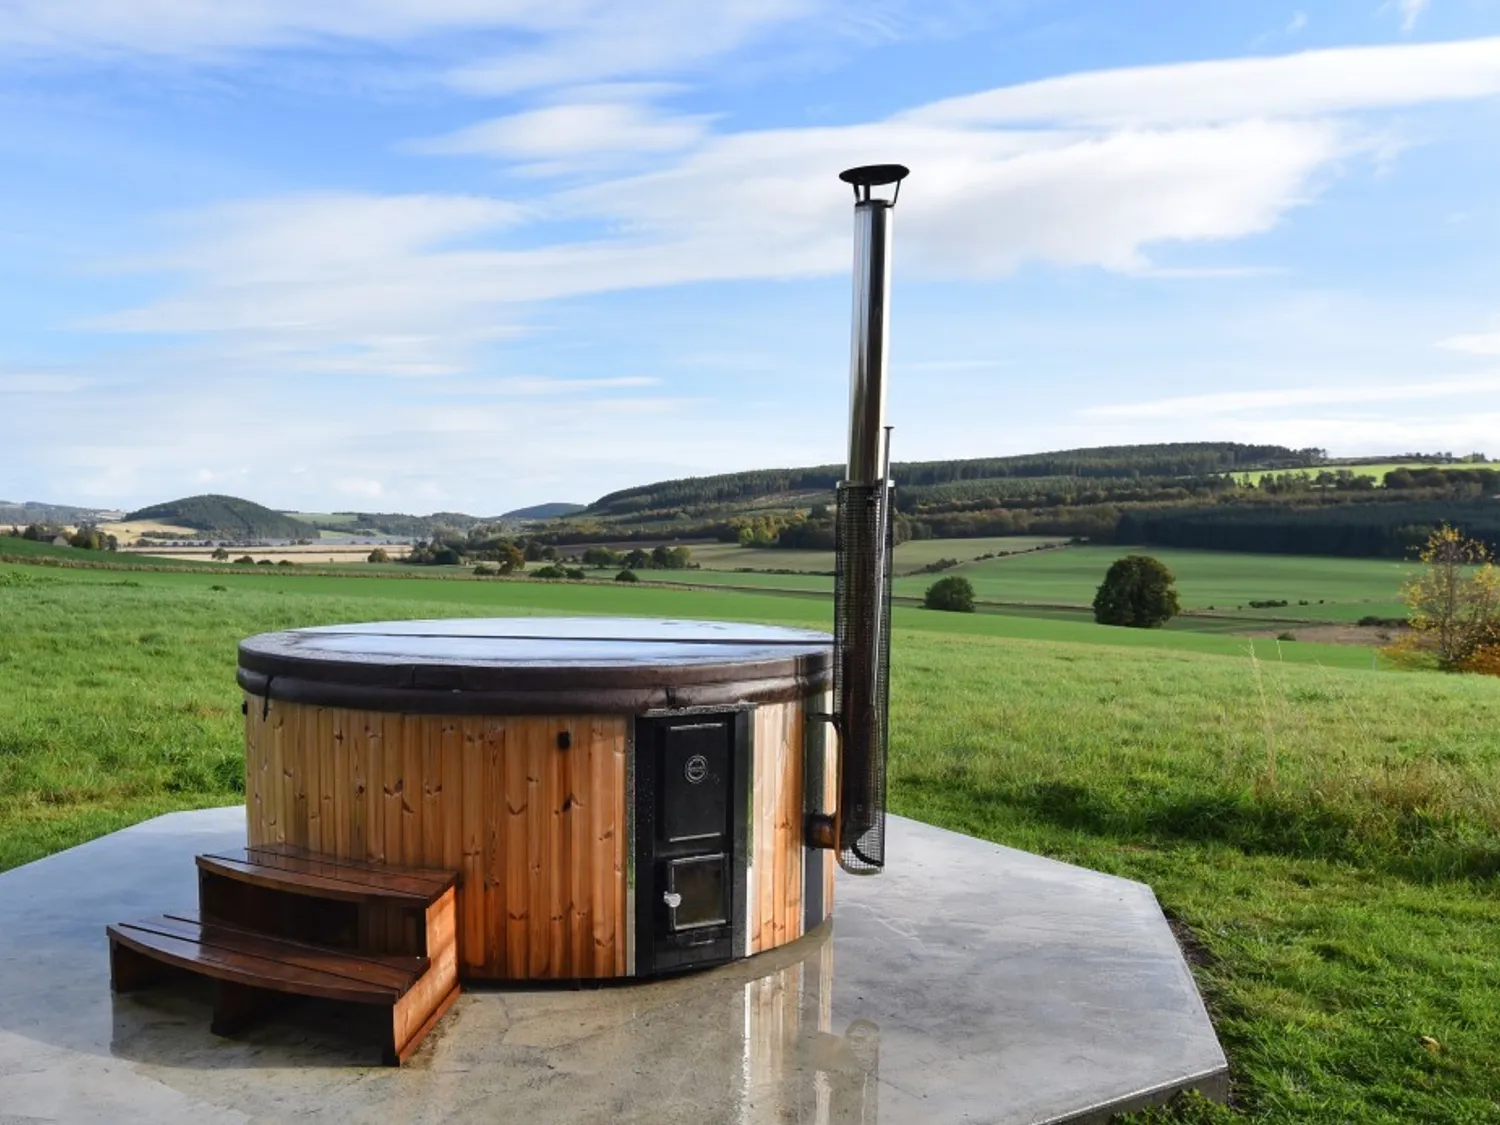 wooden hot tub with views over fields to woodlands